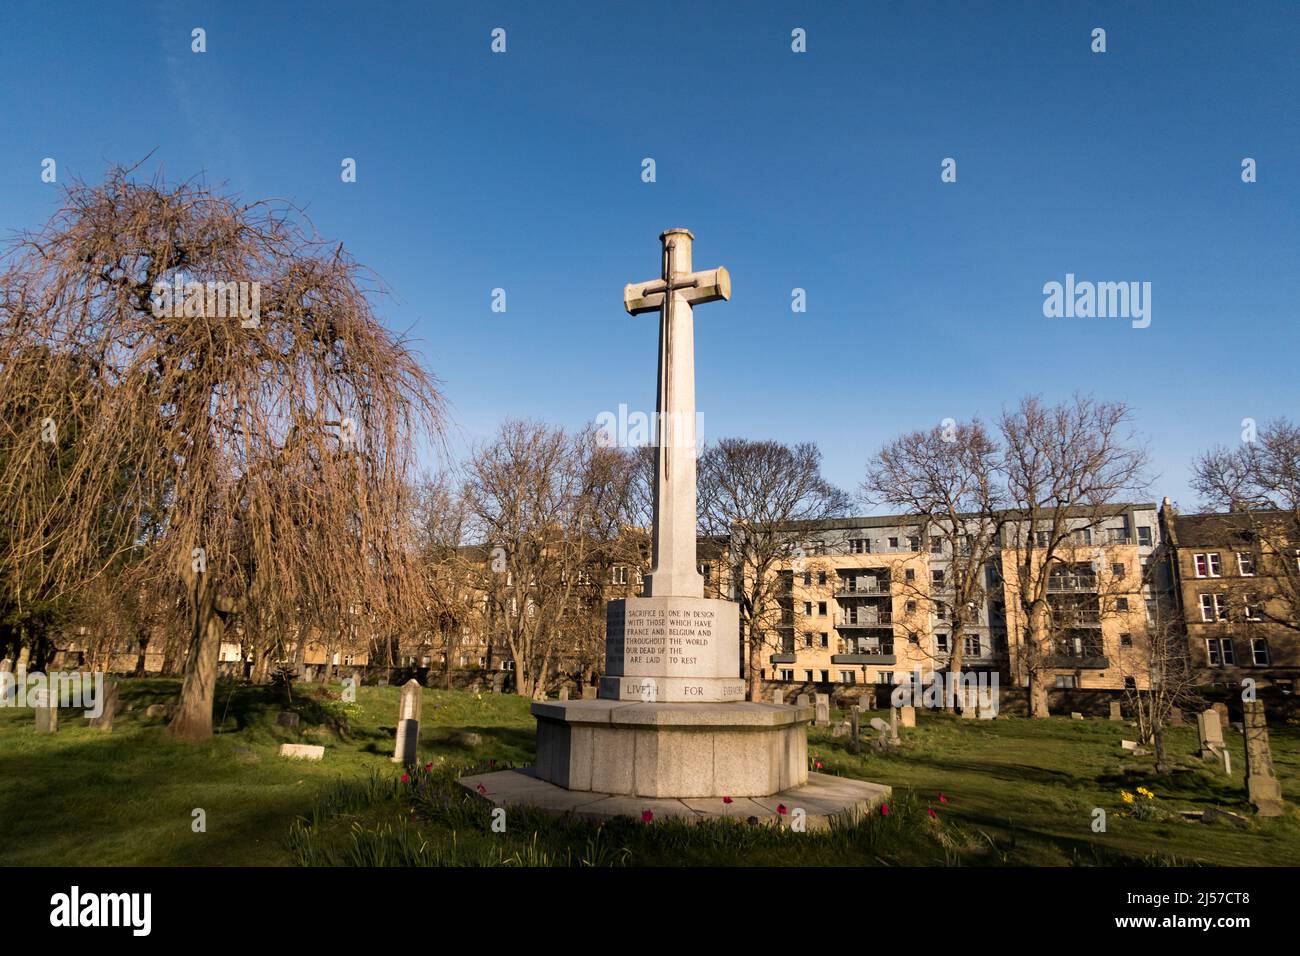 A view of a graveyard Stock Photo